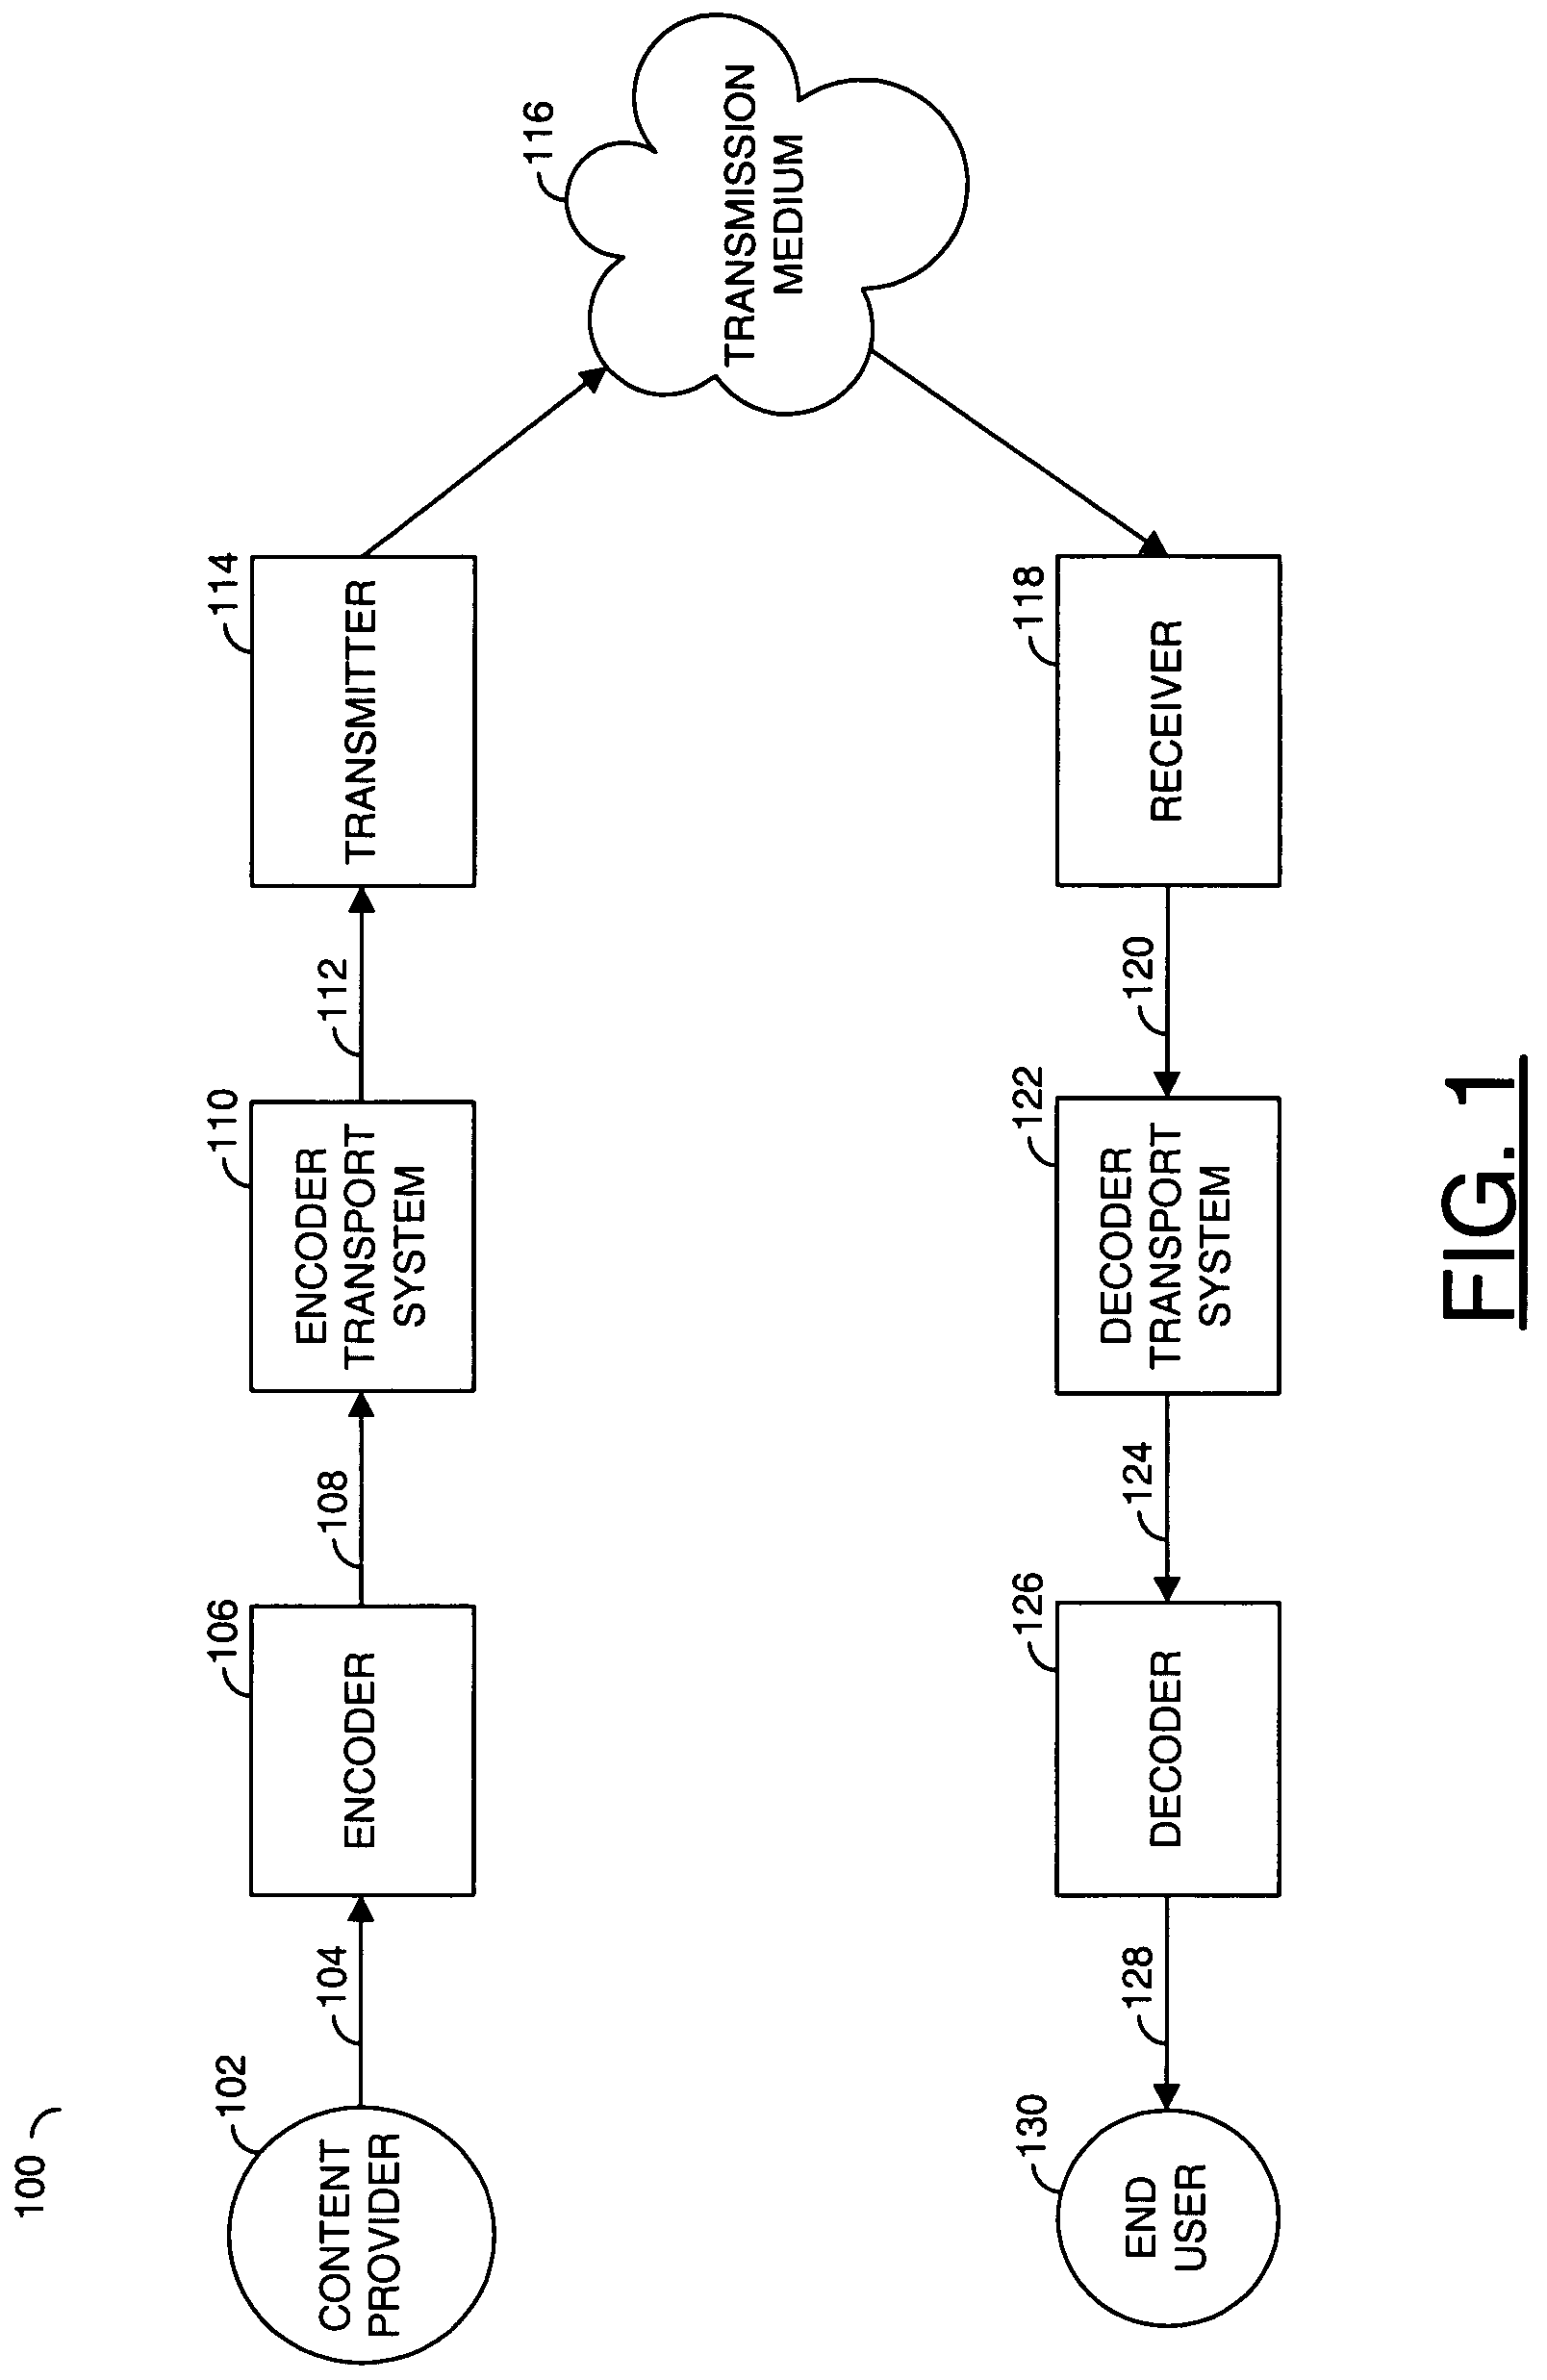 Programmable quantization dead zone and threshold for standard-based H.264 and/or VC1 video encoding